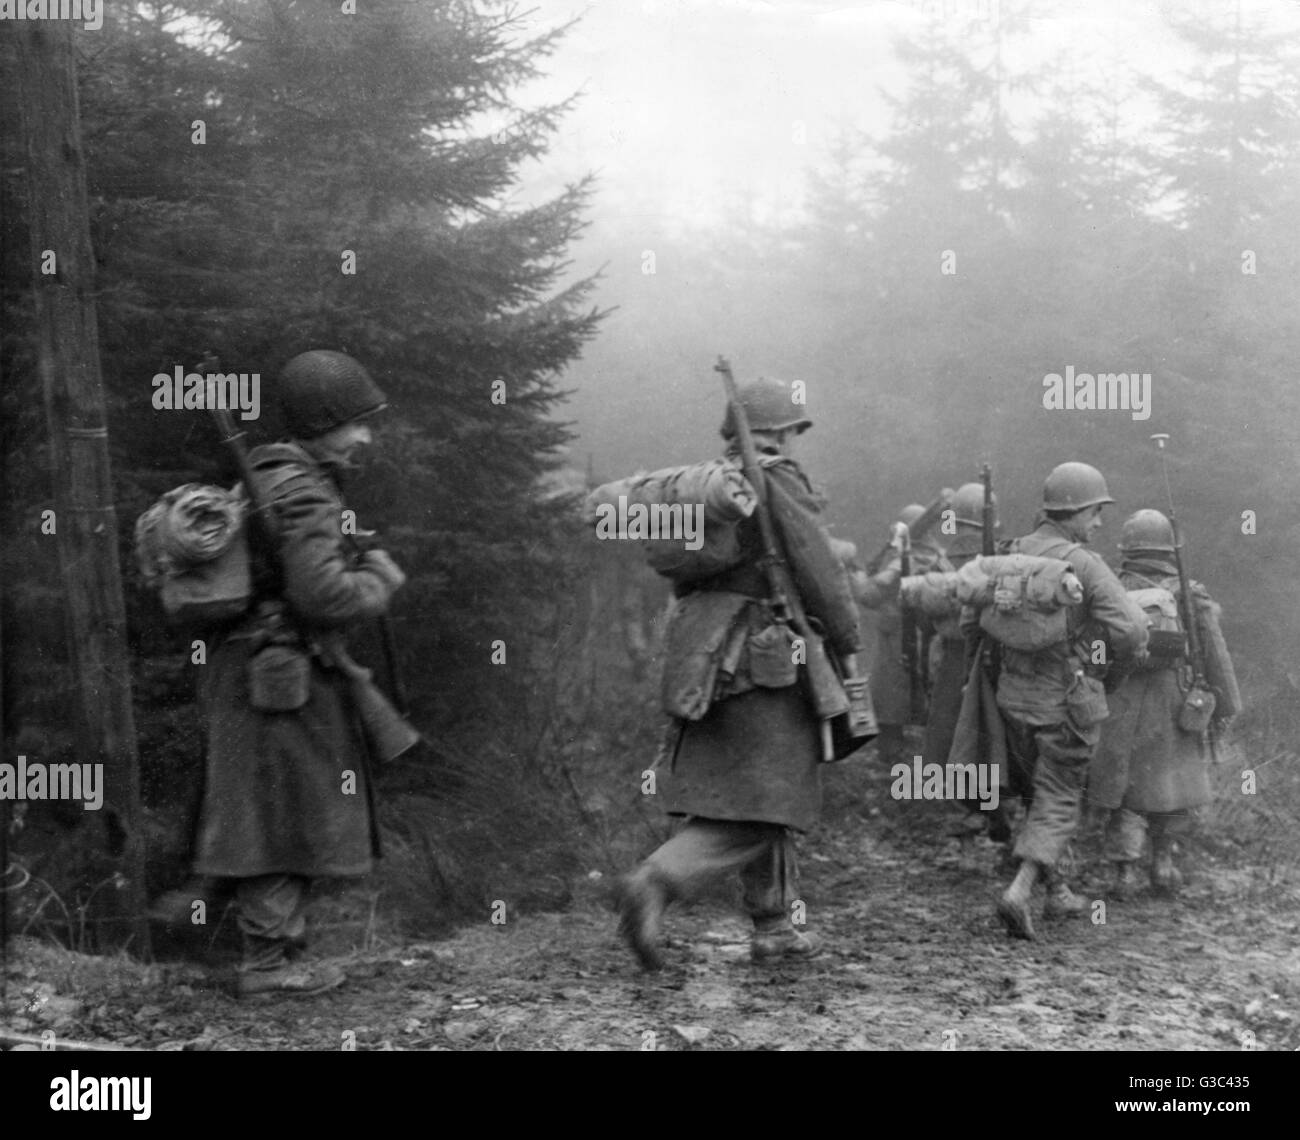 American soldiers advance through the forest of Ardennes, on their way to relieve the besieged town of Bastogne which had been surrounded during the German counter-offensive which became known as the Battle of the Bulge.     Date: December 1944 Stock Photo